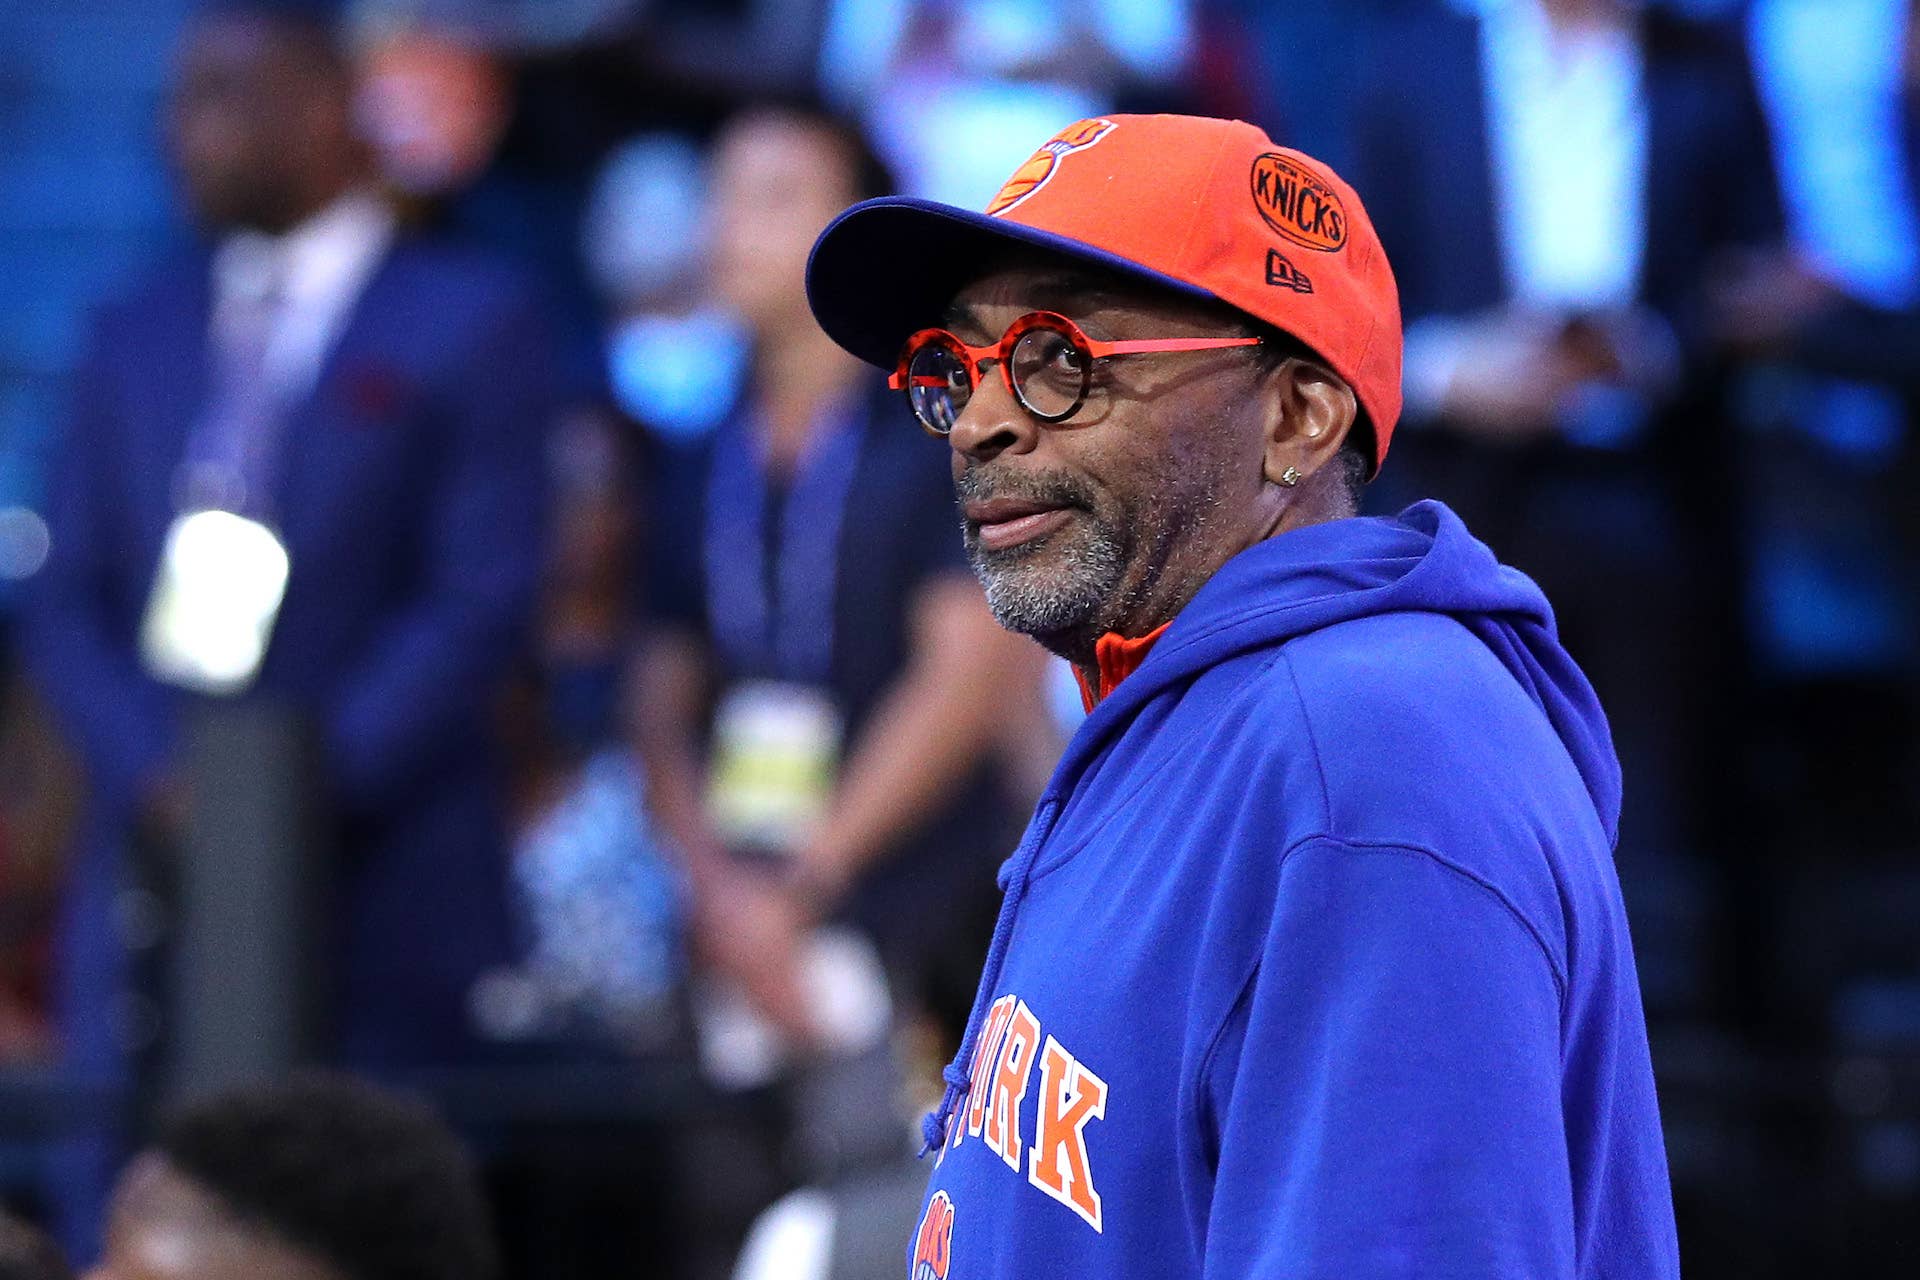 Spike Lee looks on before the start of the 2019 NBA Draft at the Barclays Center.